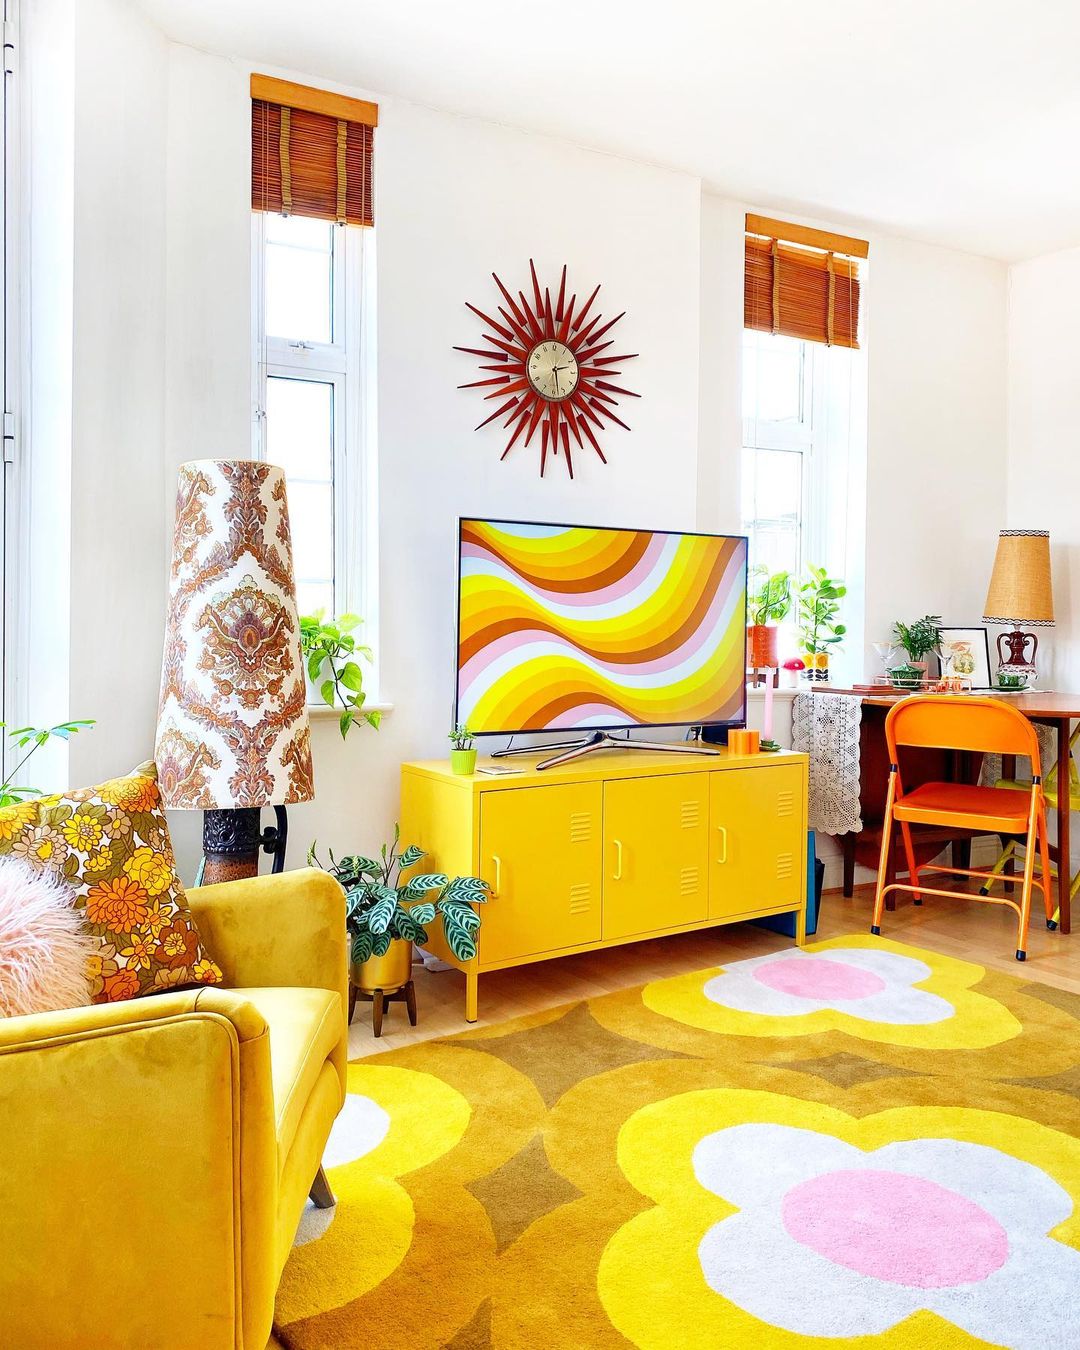 White Room with Yellow Accents and Bright Area Rug. Photo by Instagram user @theretroflat